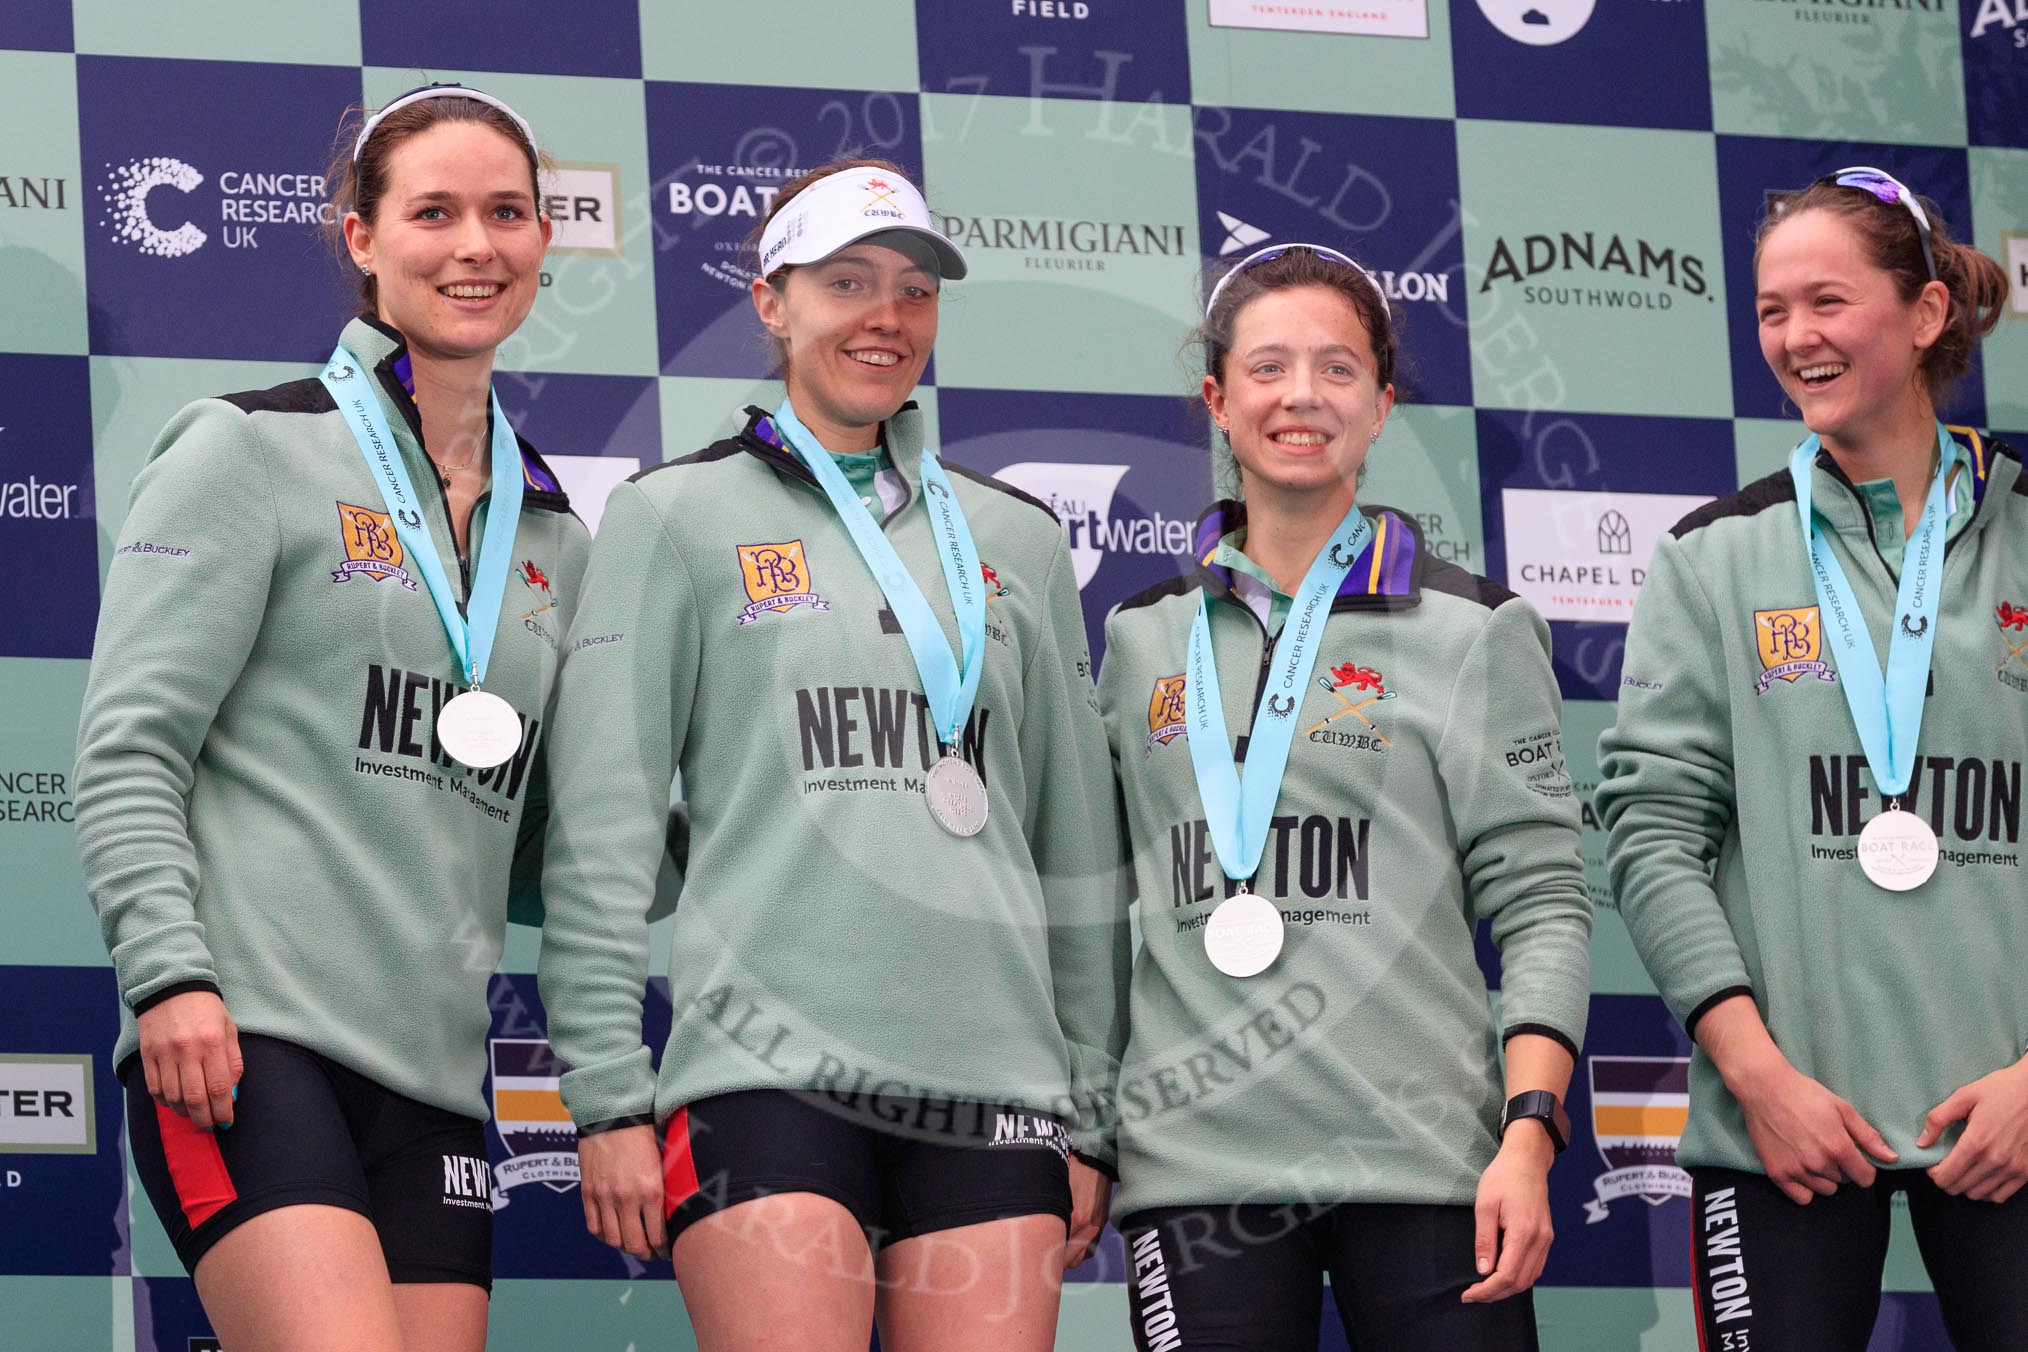 The Cancer Research UK Women's Boat Race 2018: Cambridge 4 seat Thea Zabell, 3 Kelsey Barolak , 2 Imogen Grant, and bow Tricia Smith on the podium.
River Thames between Putney Bridge and Mortlake,
London SW15,

United Kingdom,
on 24 March 2018 at 17:07, image #259